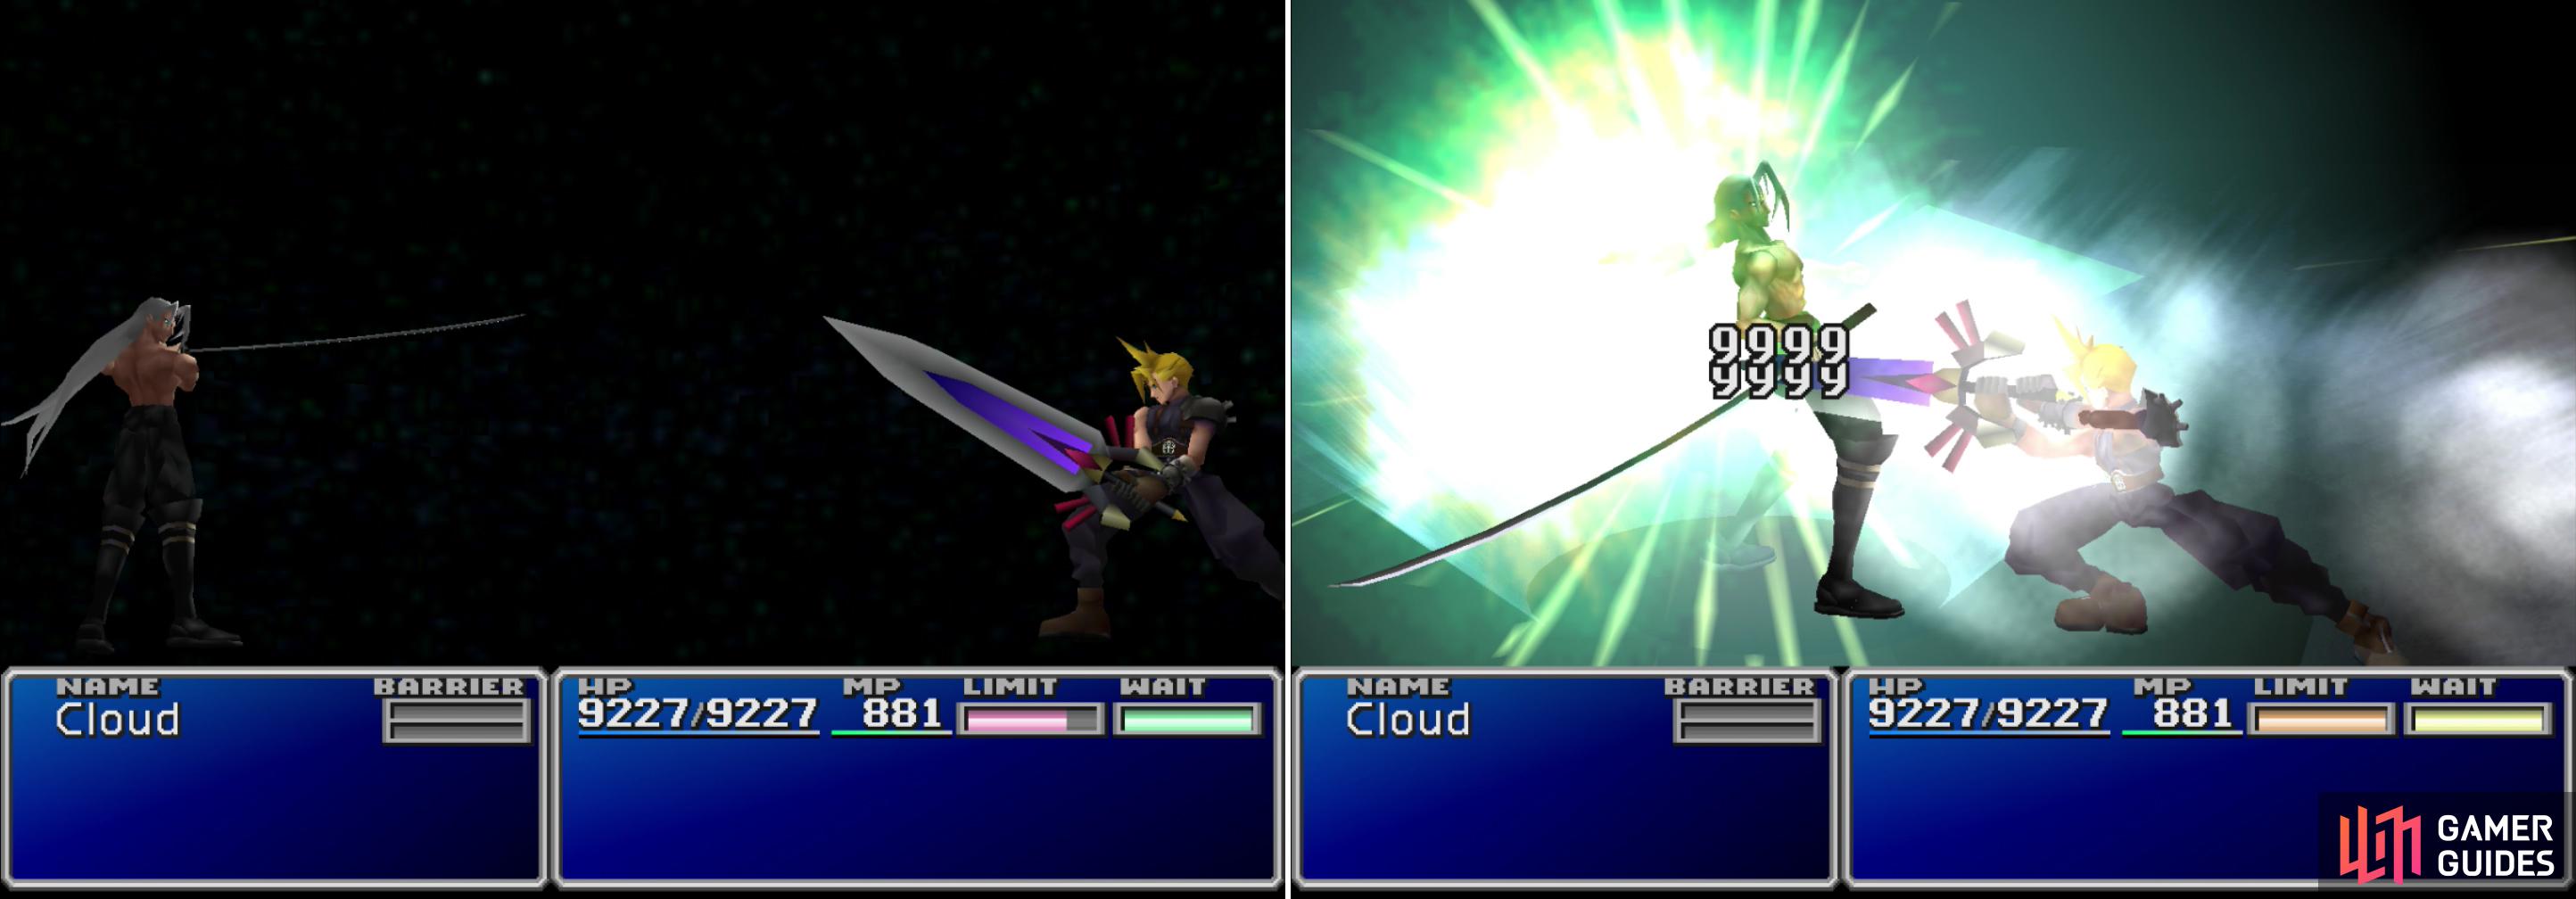 Cloud and Sephiroth will face off one final time (left). After his Limit Meter charges, unleash Clouds devastating Omnislash Limit Break to finally settle the score (right). This ones for you, Aeris.